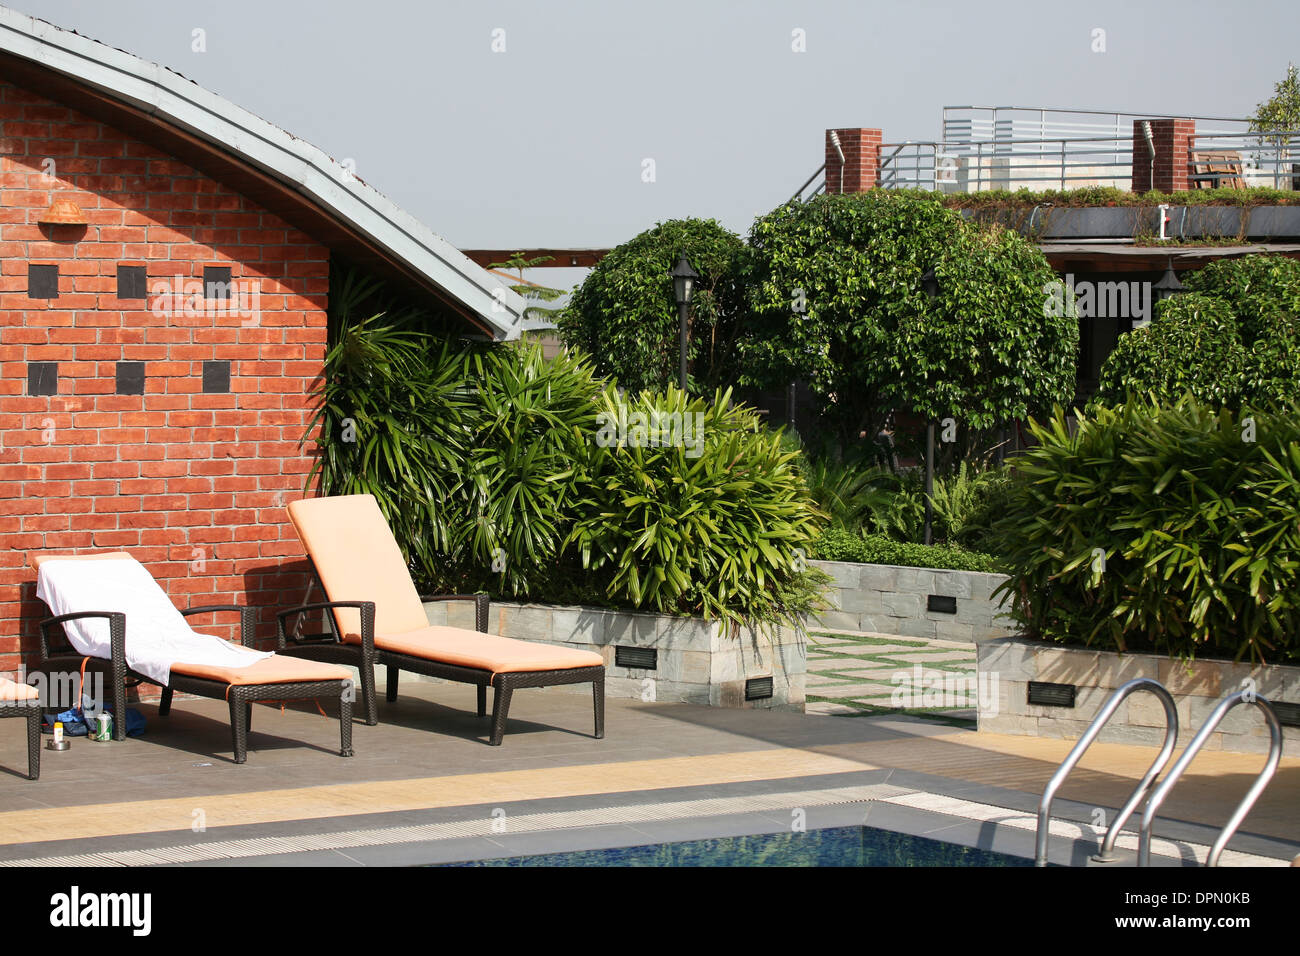 Luxurious swimming pool area on the hotel rooftop in Bangladesh Stock Photo